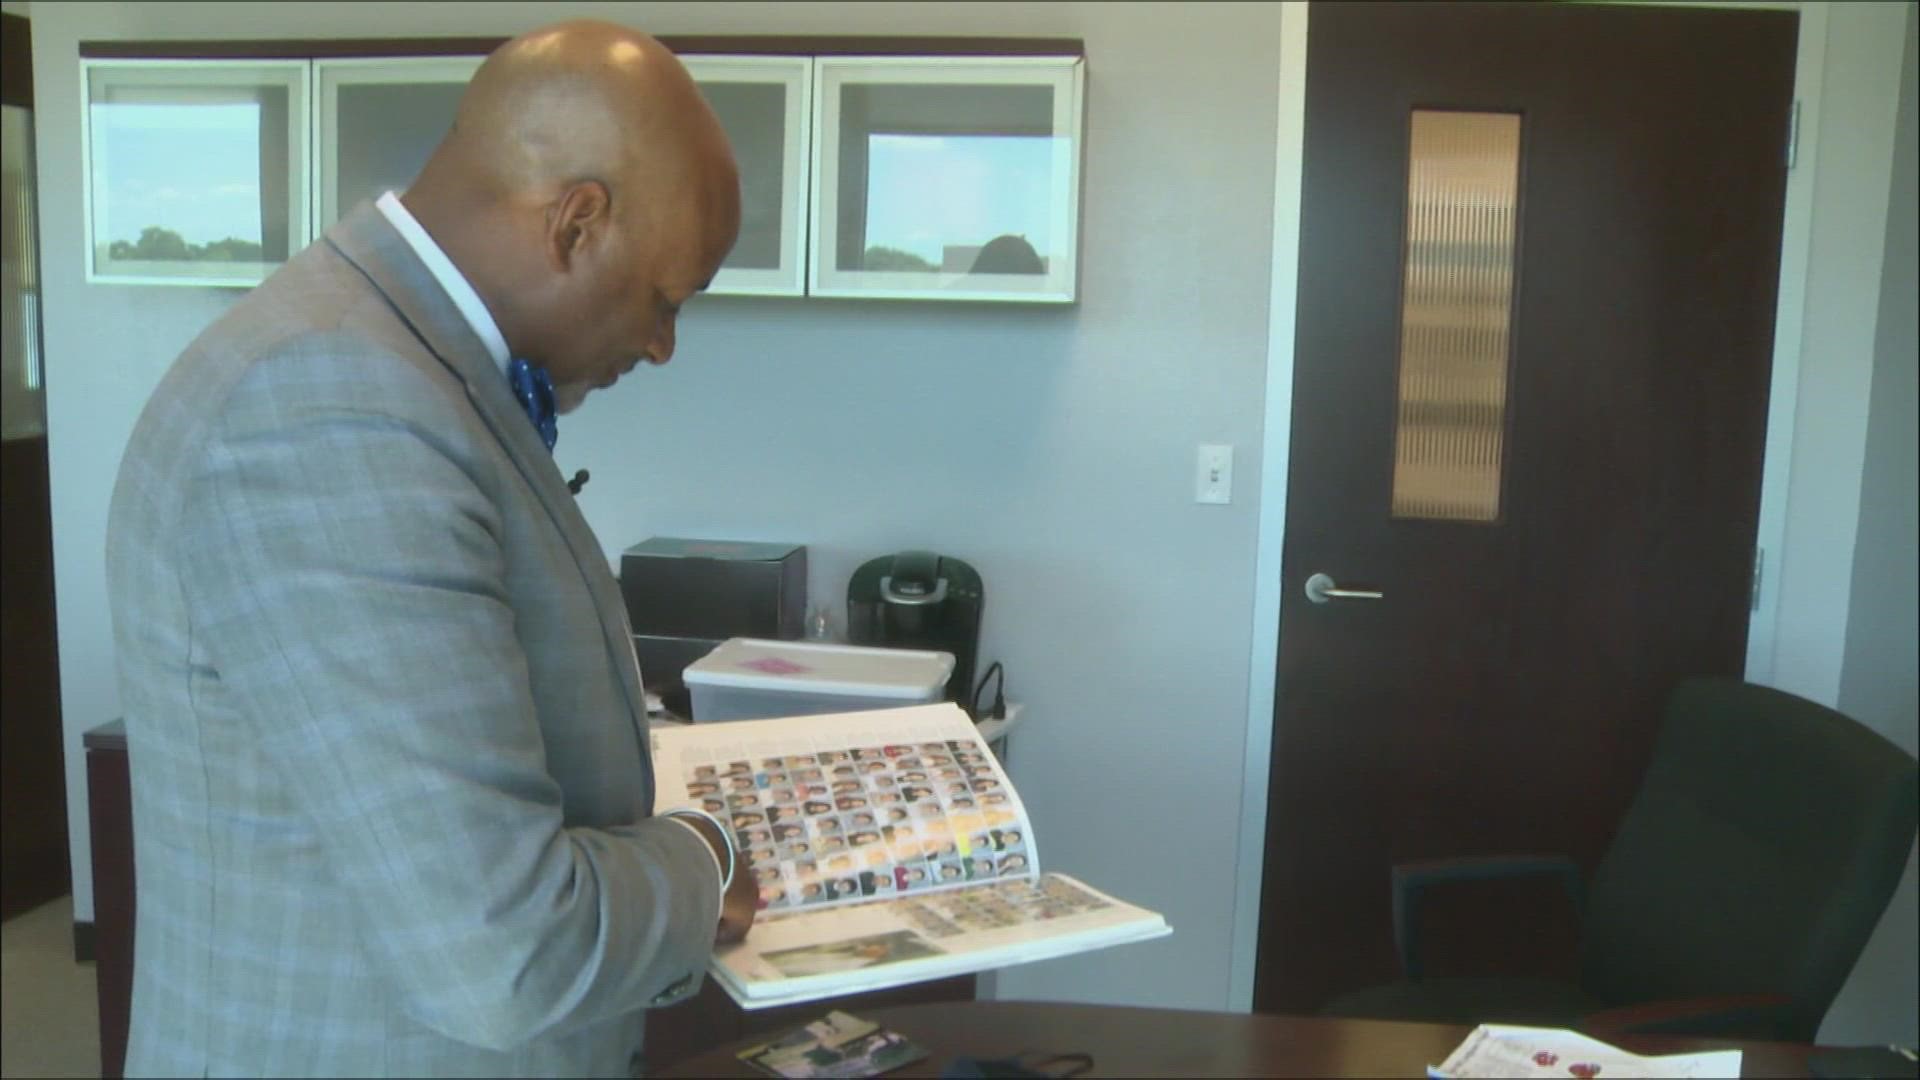 Cedar Hill superintendent Dr. Gerald Hudson still remembers the student who sent it, 15 years after she graduated.